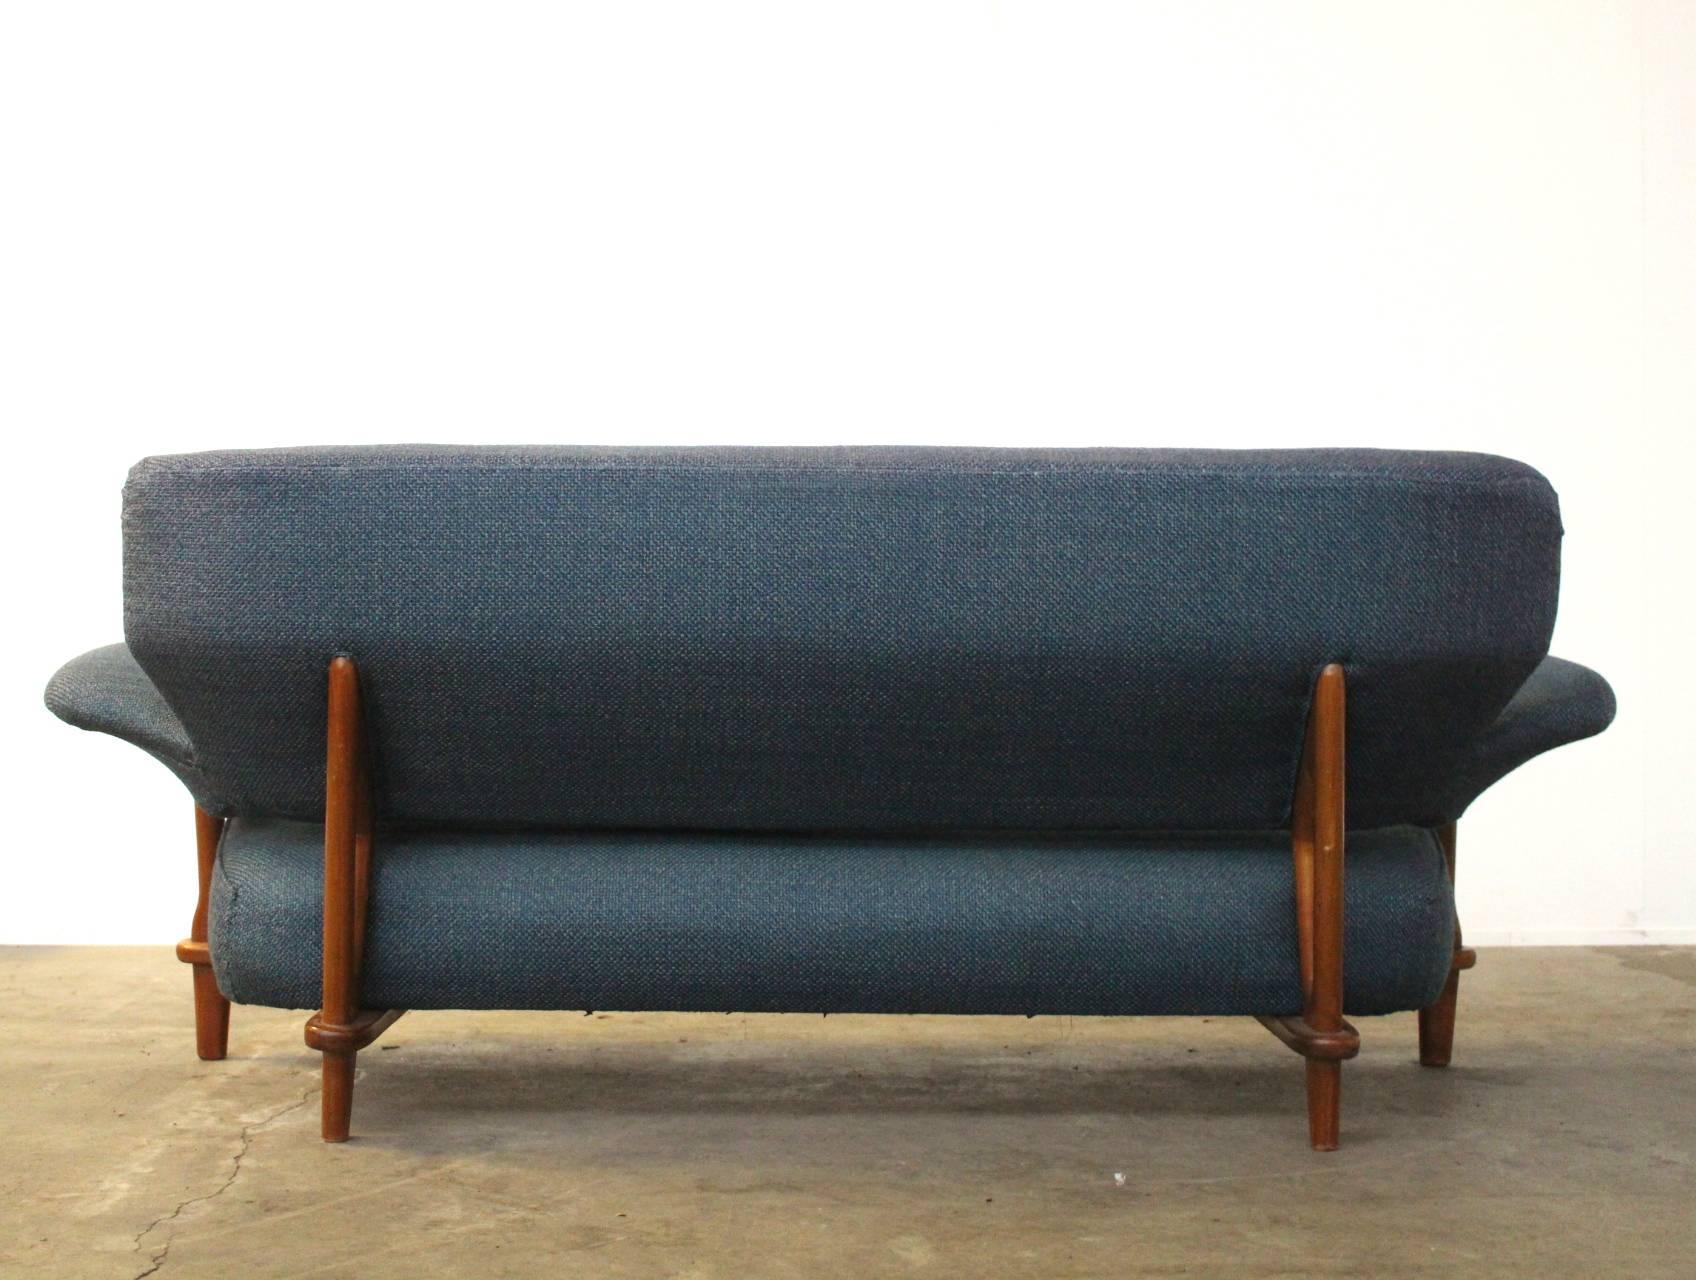 Rare Three-Seat Sofa Model 109 by Theo Ruth for Artifort, Dutch Design, 1950s For Sale 3